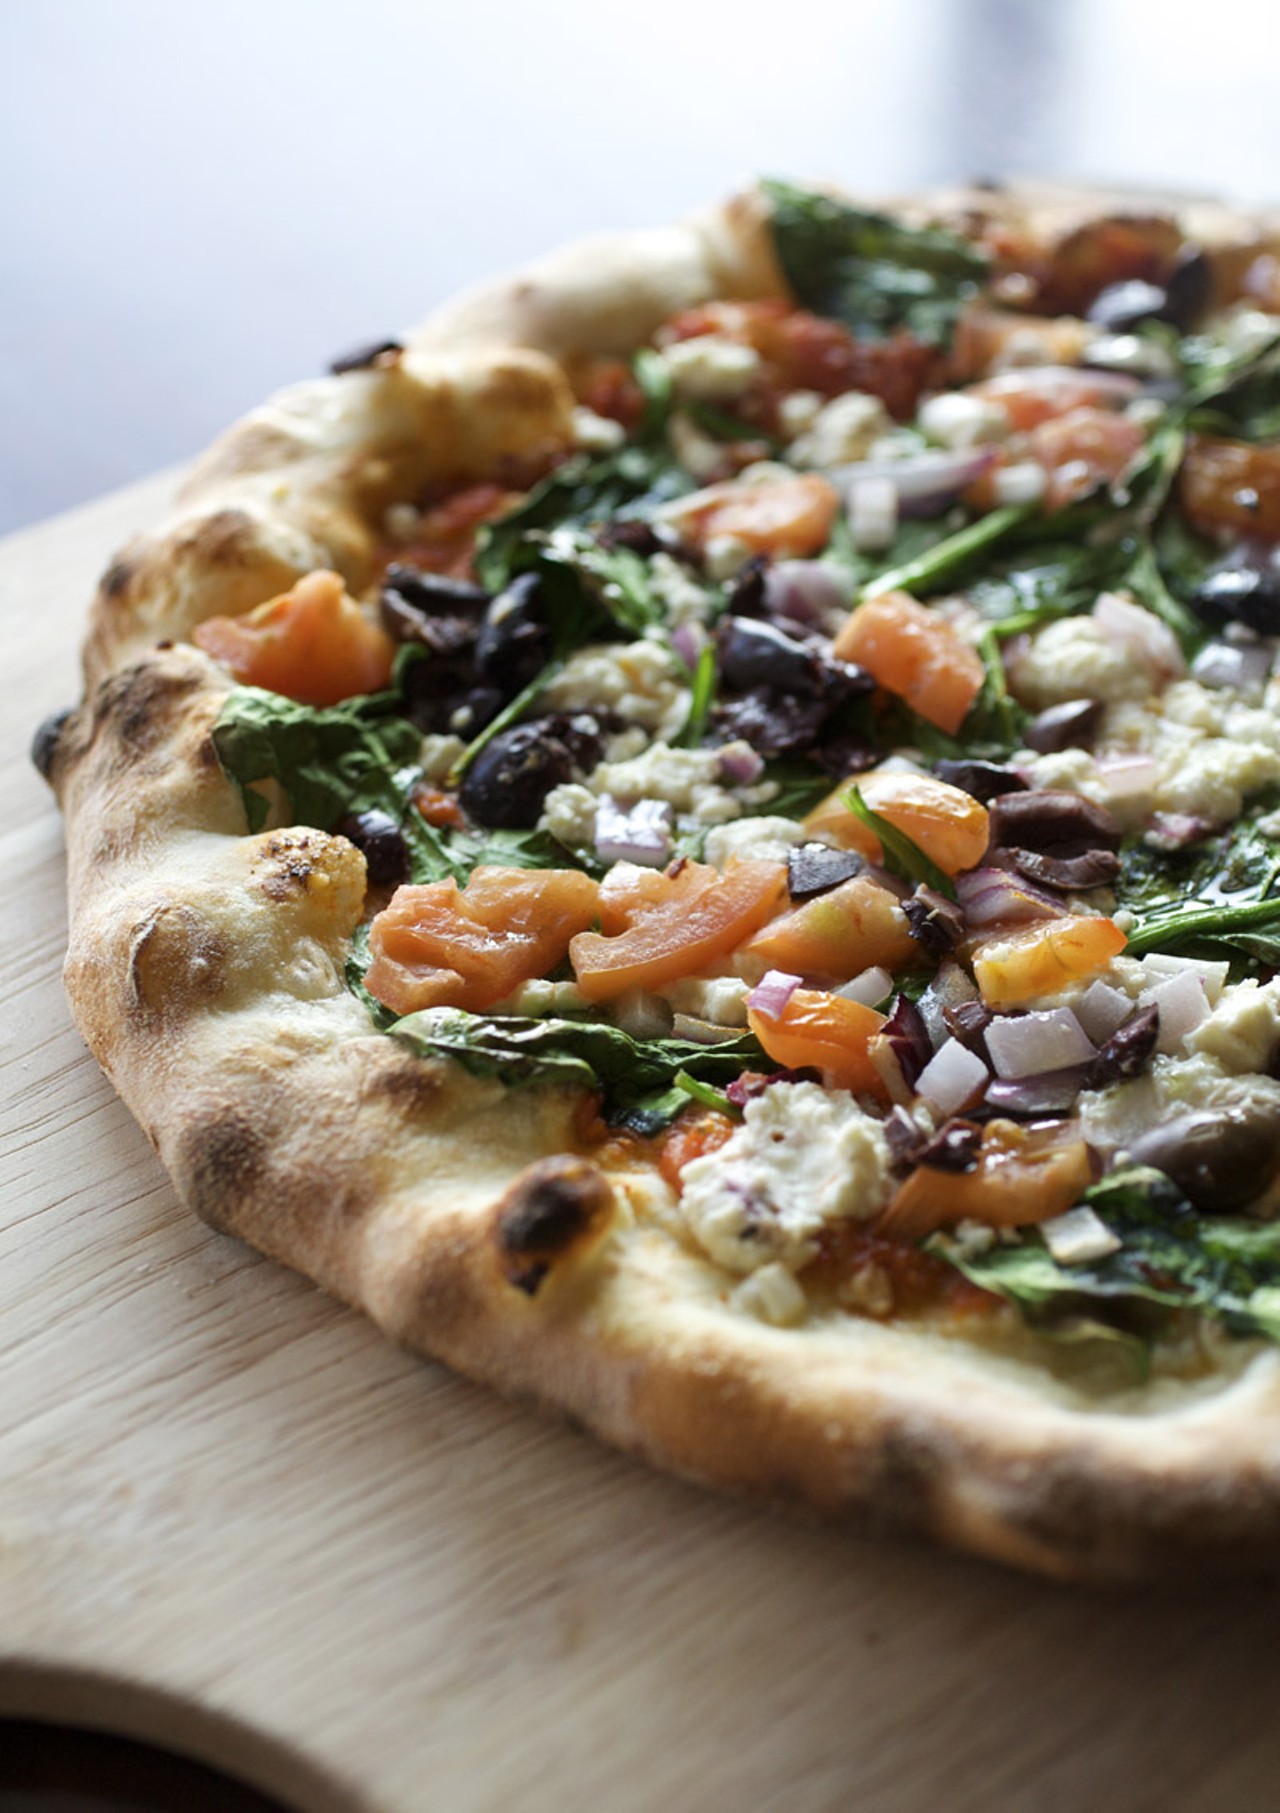 The Grecian Pizza is prepared in the wood burning oven with feta, baby spinach, roma tomatoes, kalamata olives, red onions and a sun-dried tomato pesto.